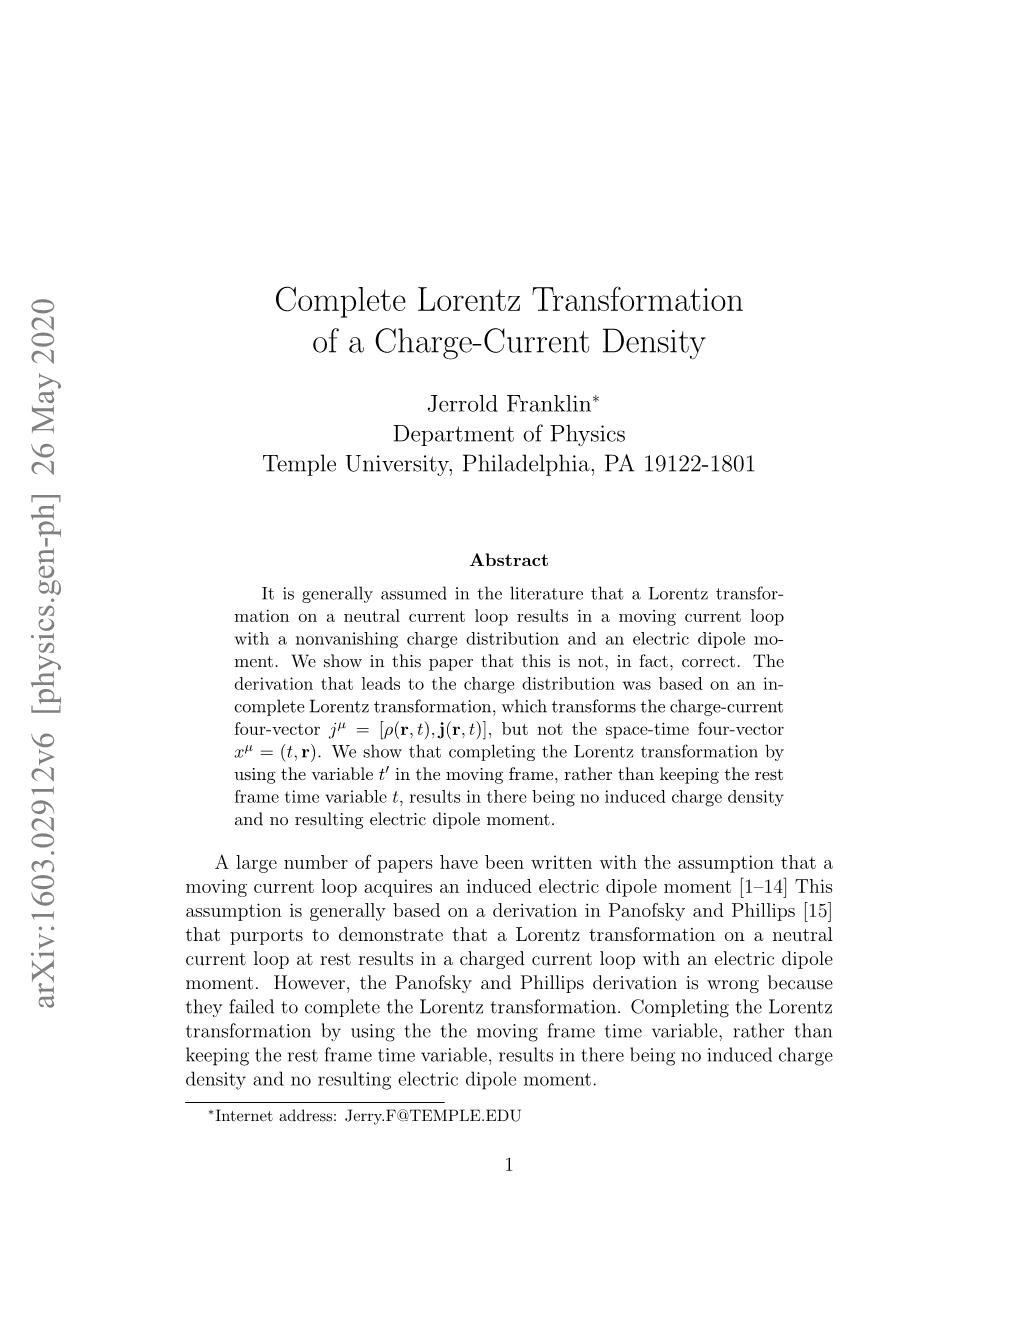 Complete Lorentz Transformation of a Charge-Current Density Arxiv